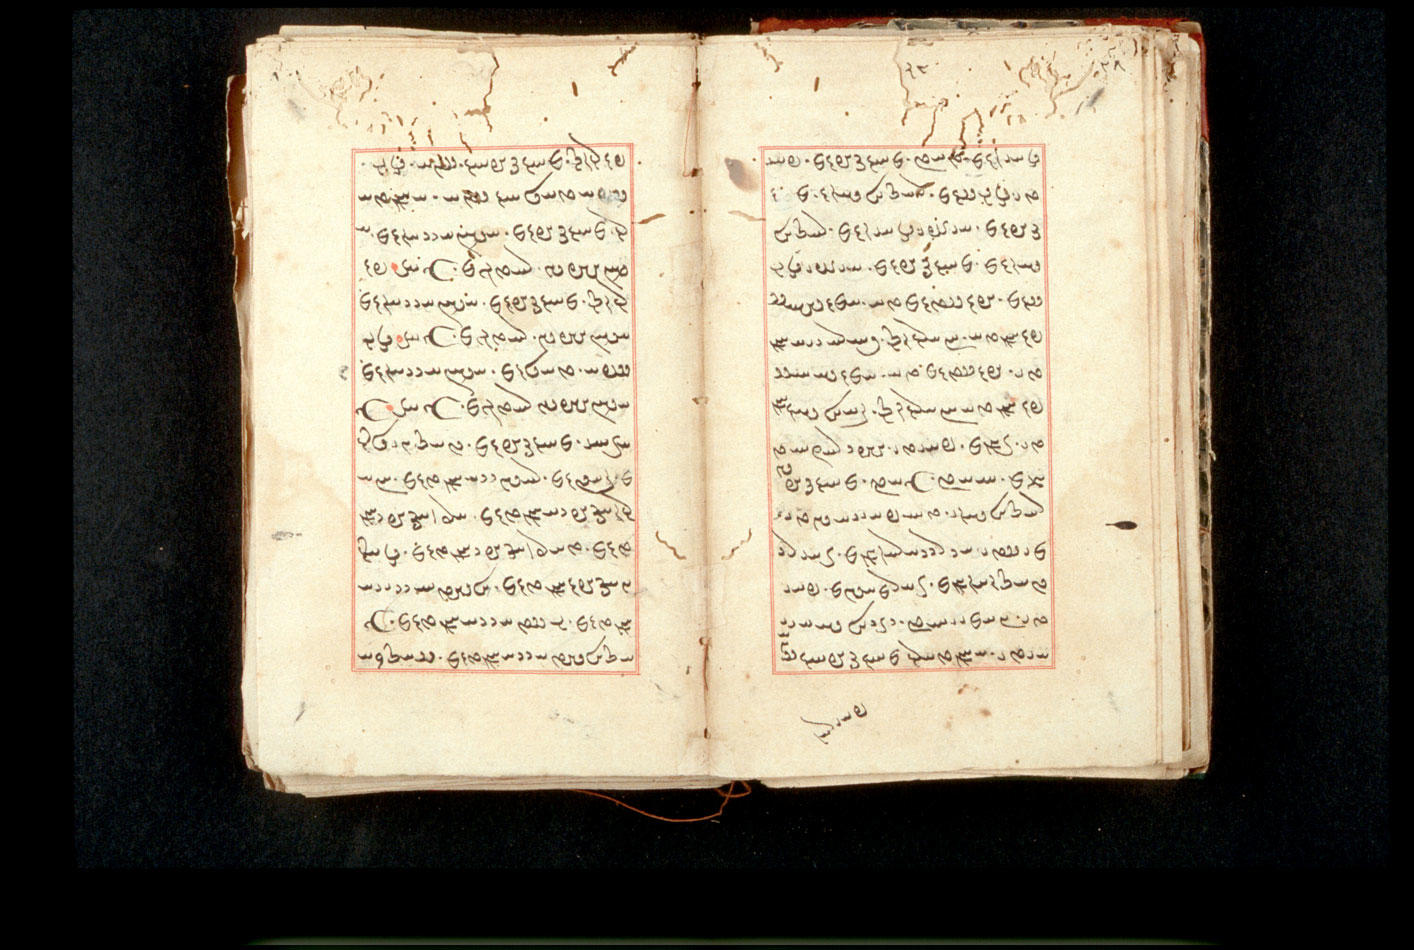 Folios 28v (right) and 29r (left)